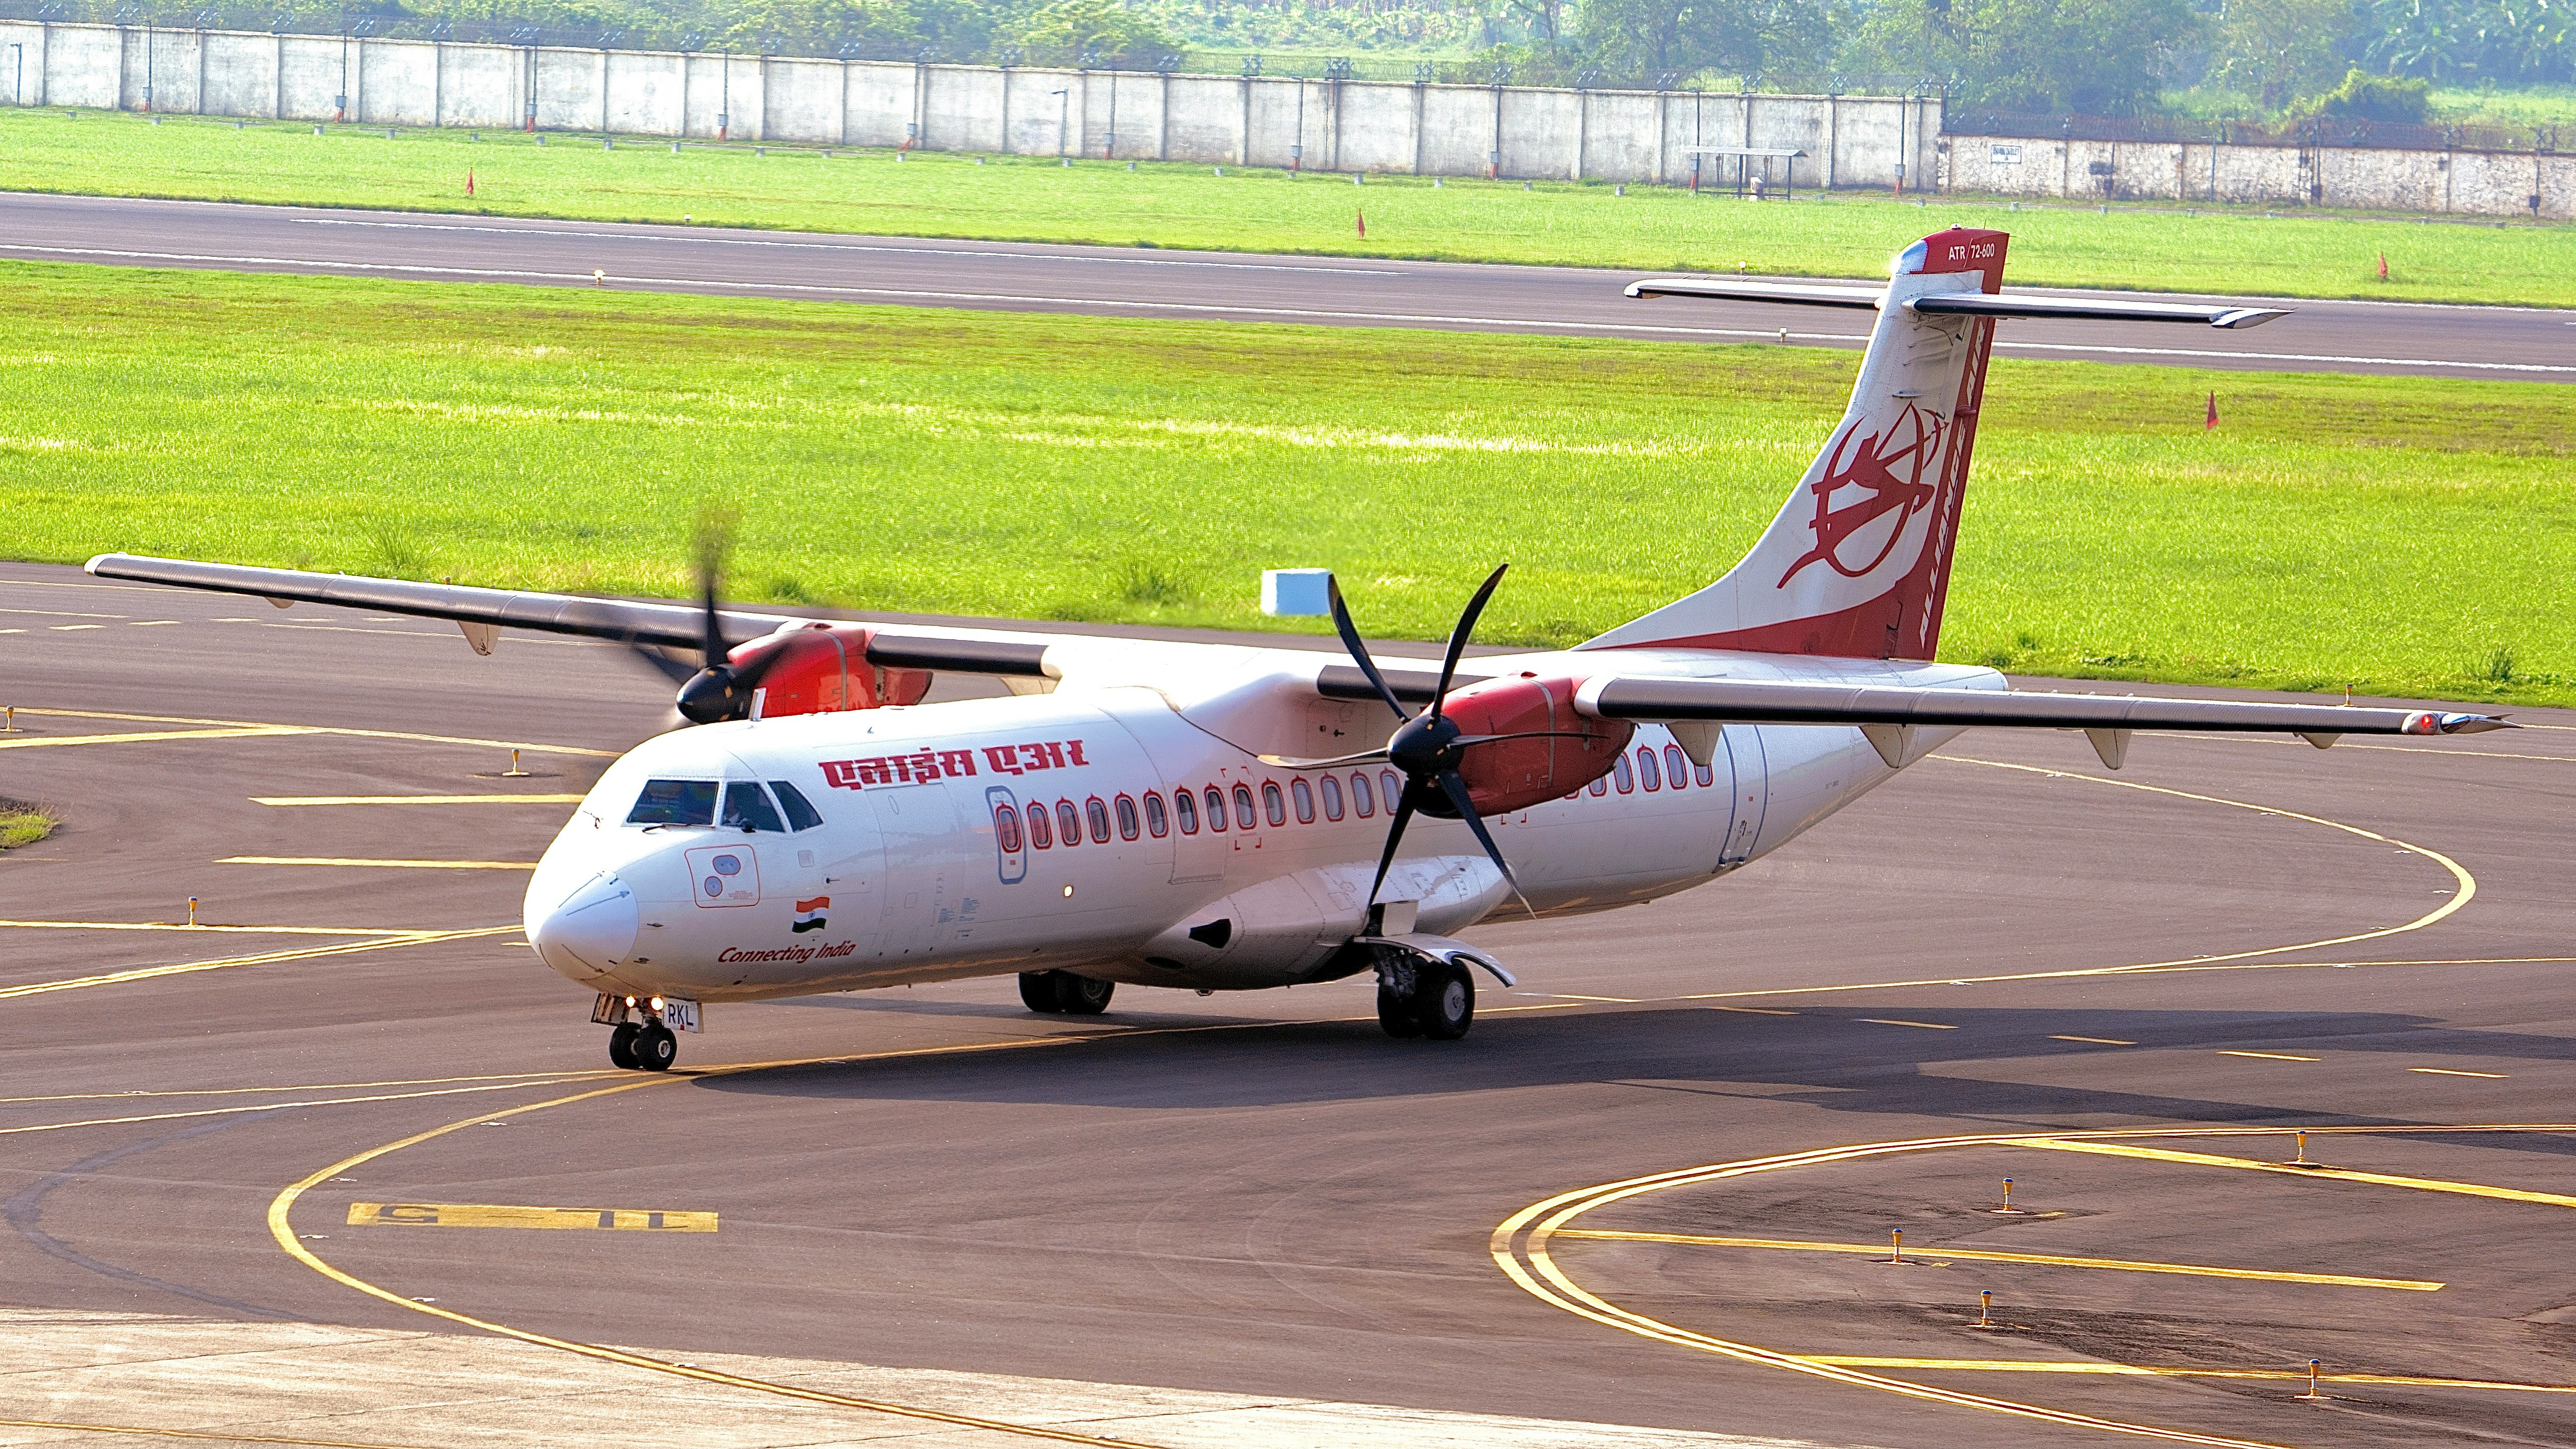 An Air India ATR after landing in the runway